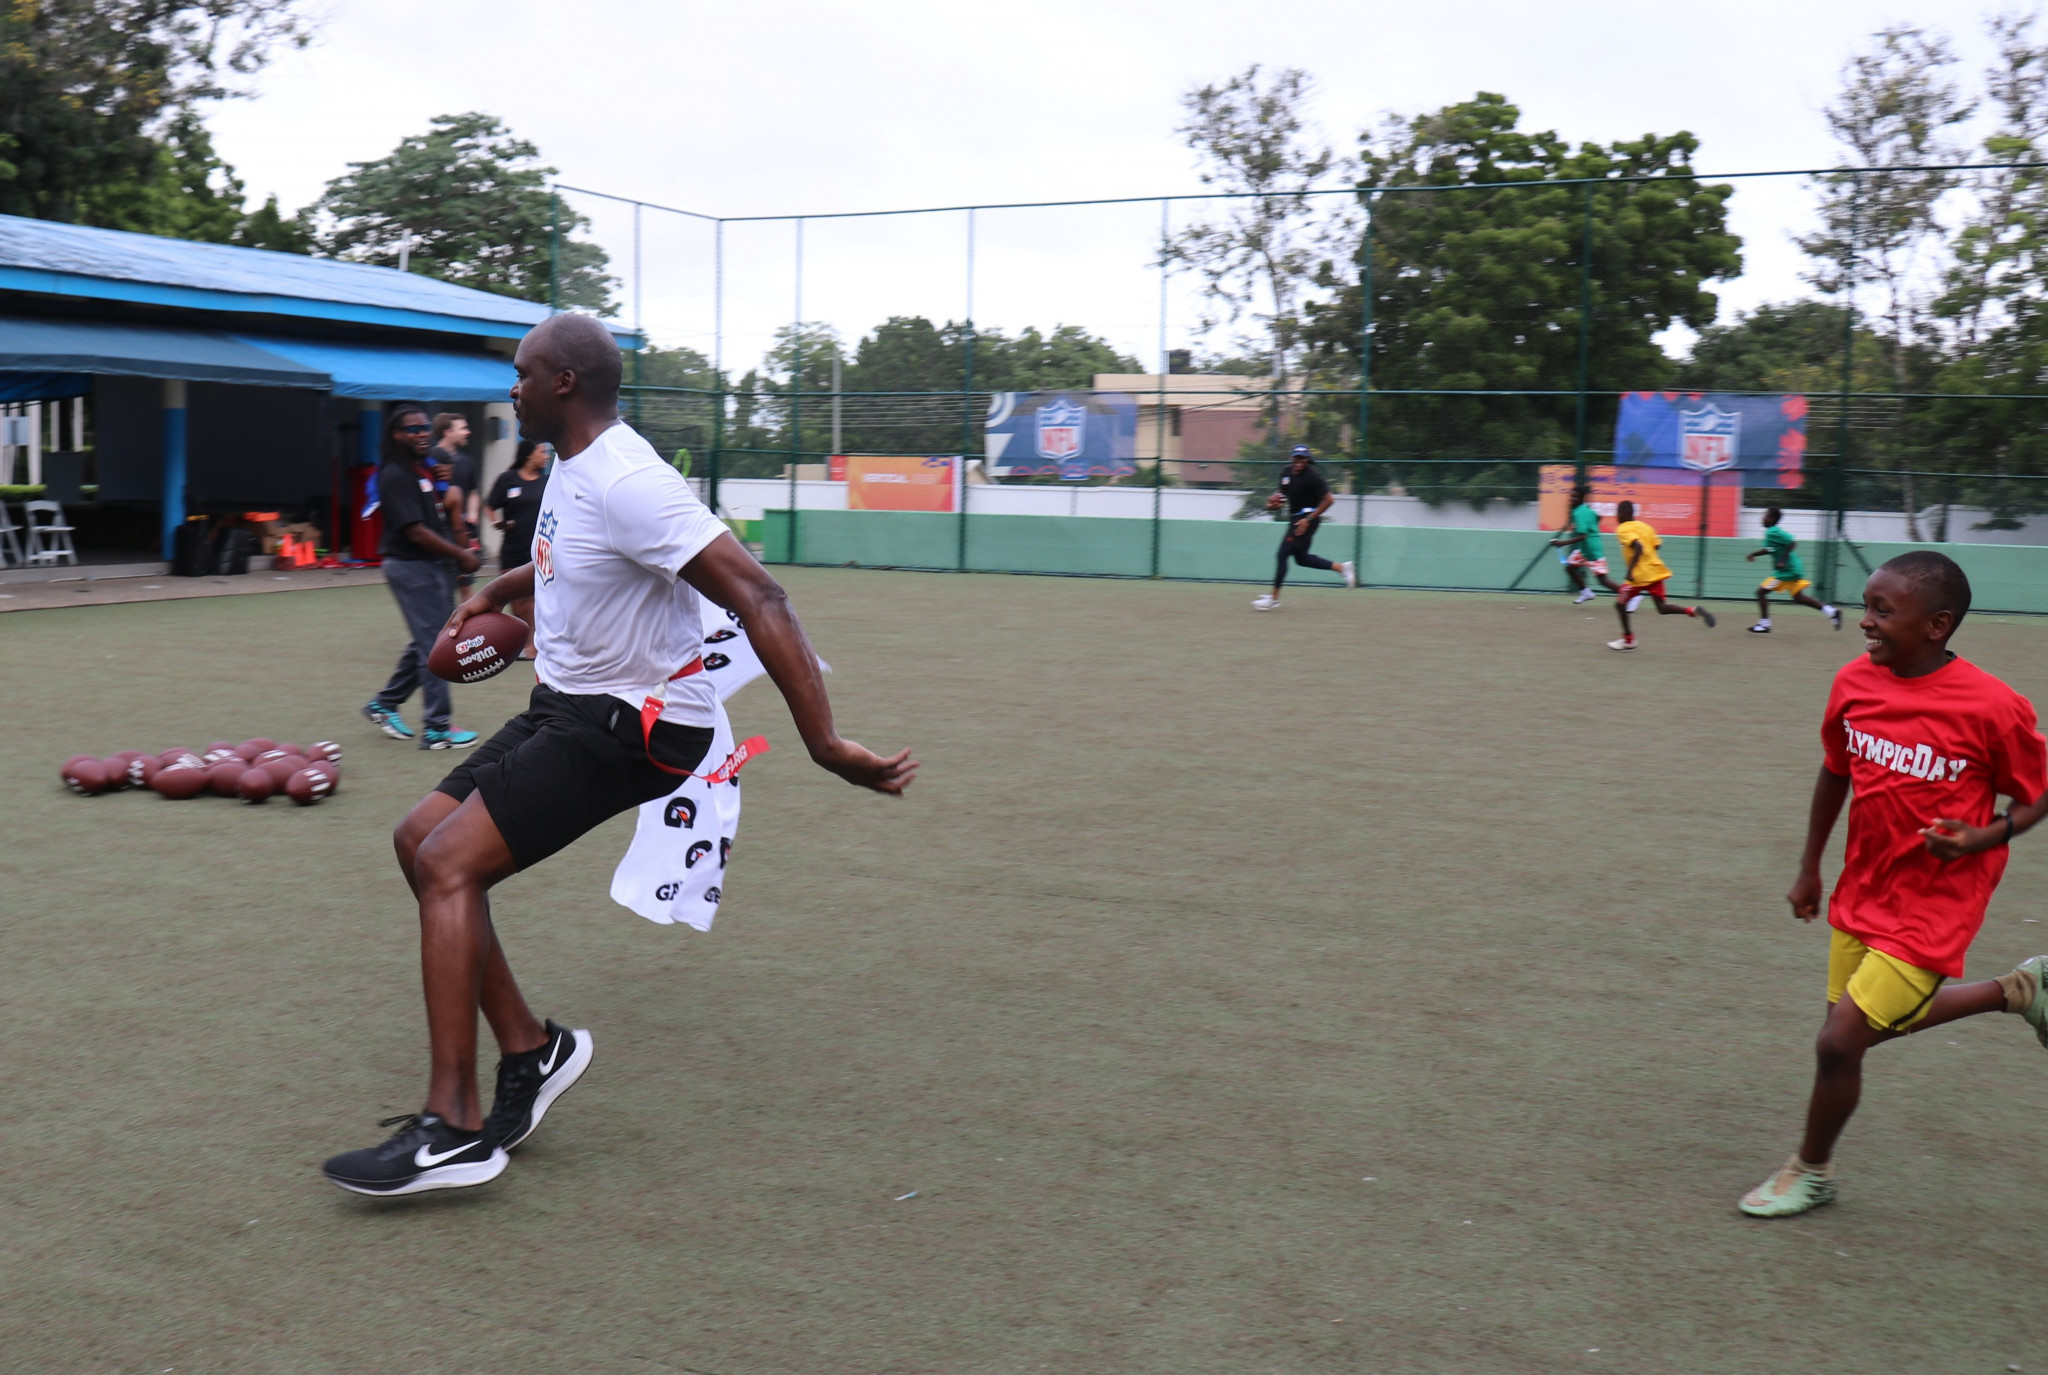 Several current and former NFL players, including Mathias Kiwanuka, took part in the event in Accra ©Emily Wirtz/NFL